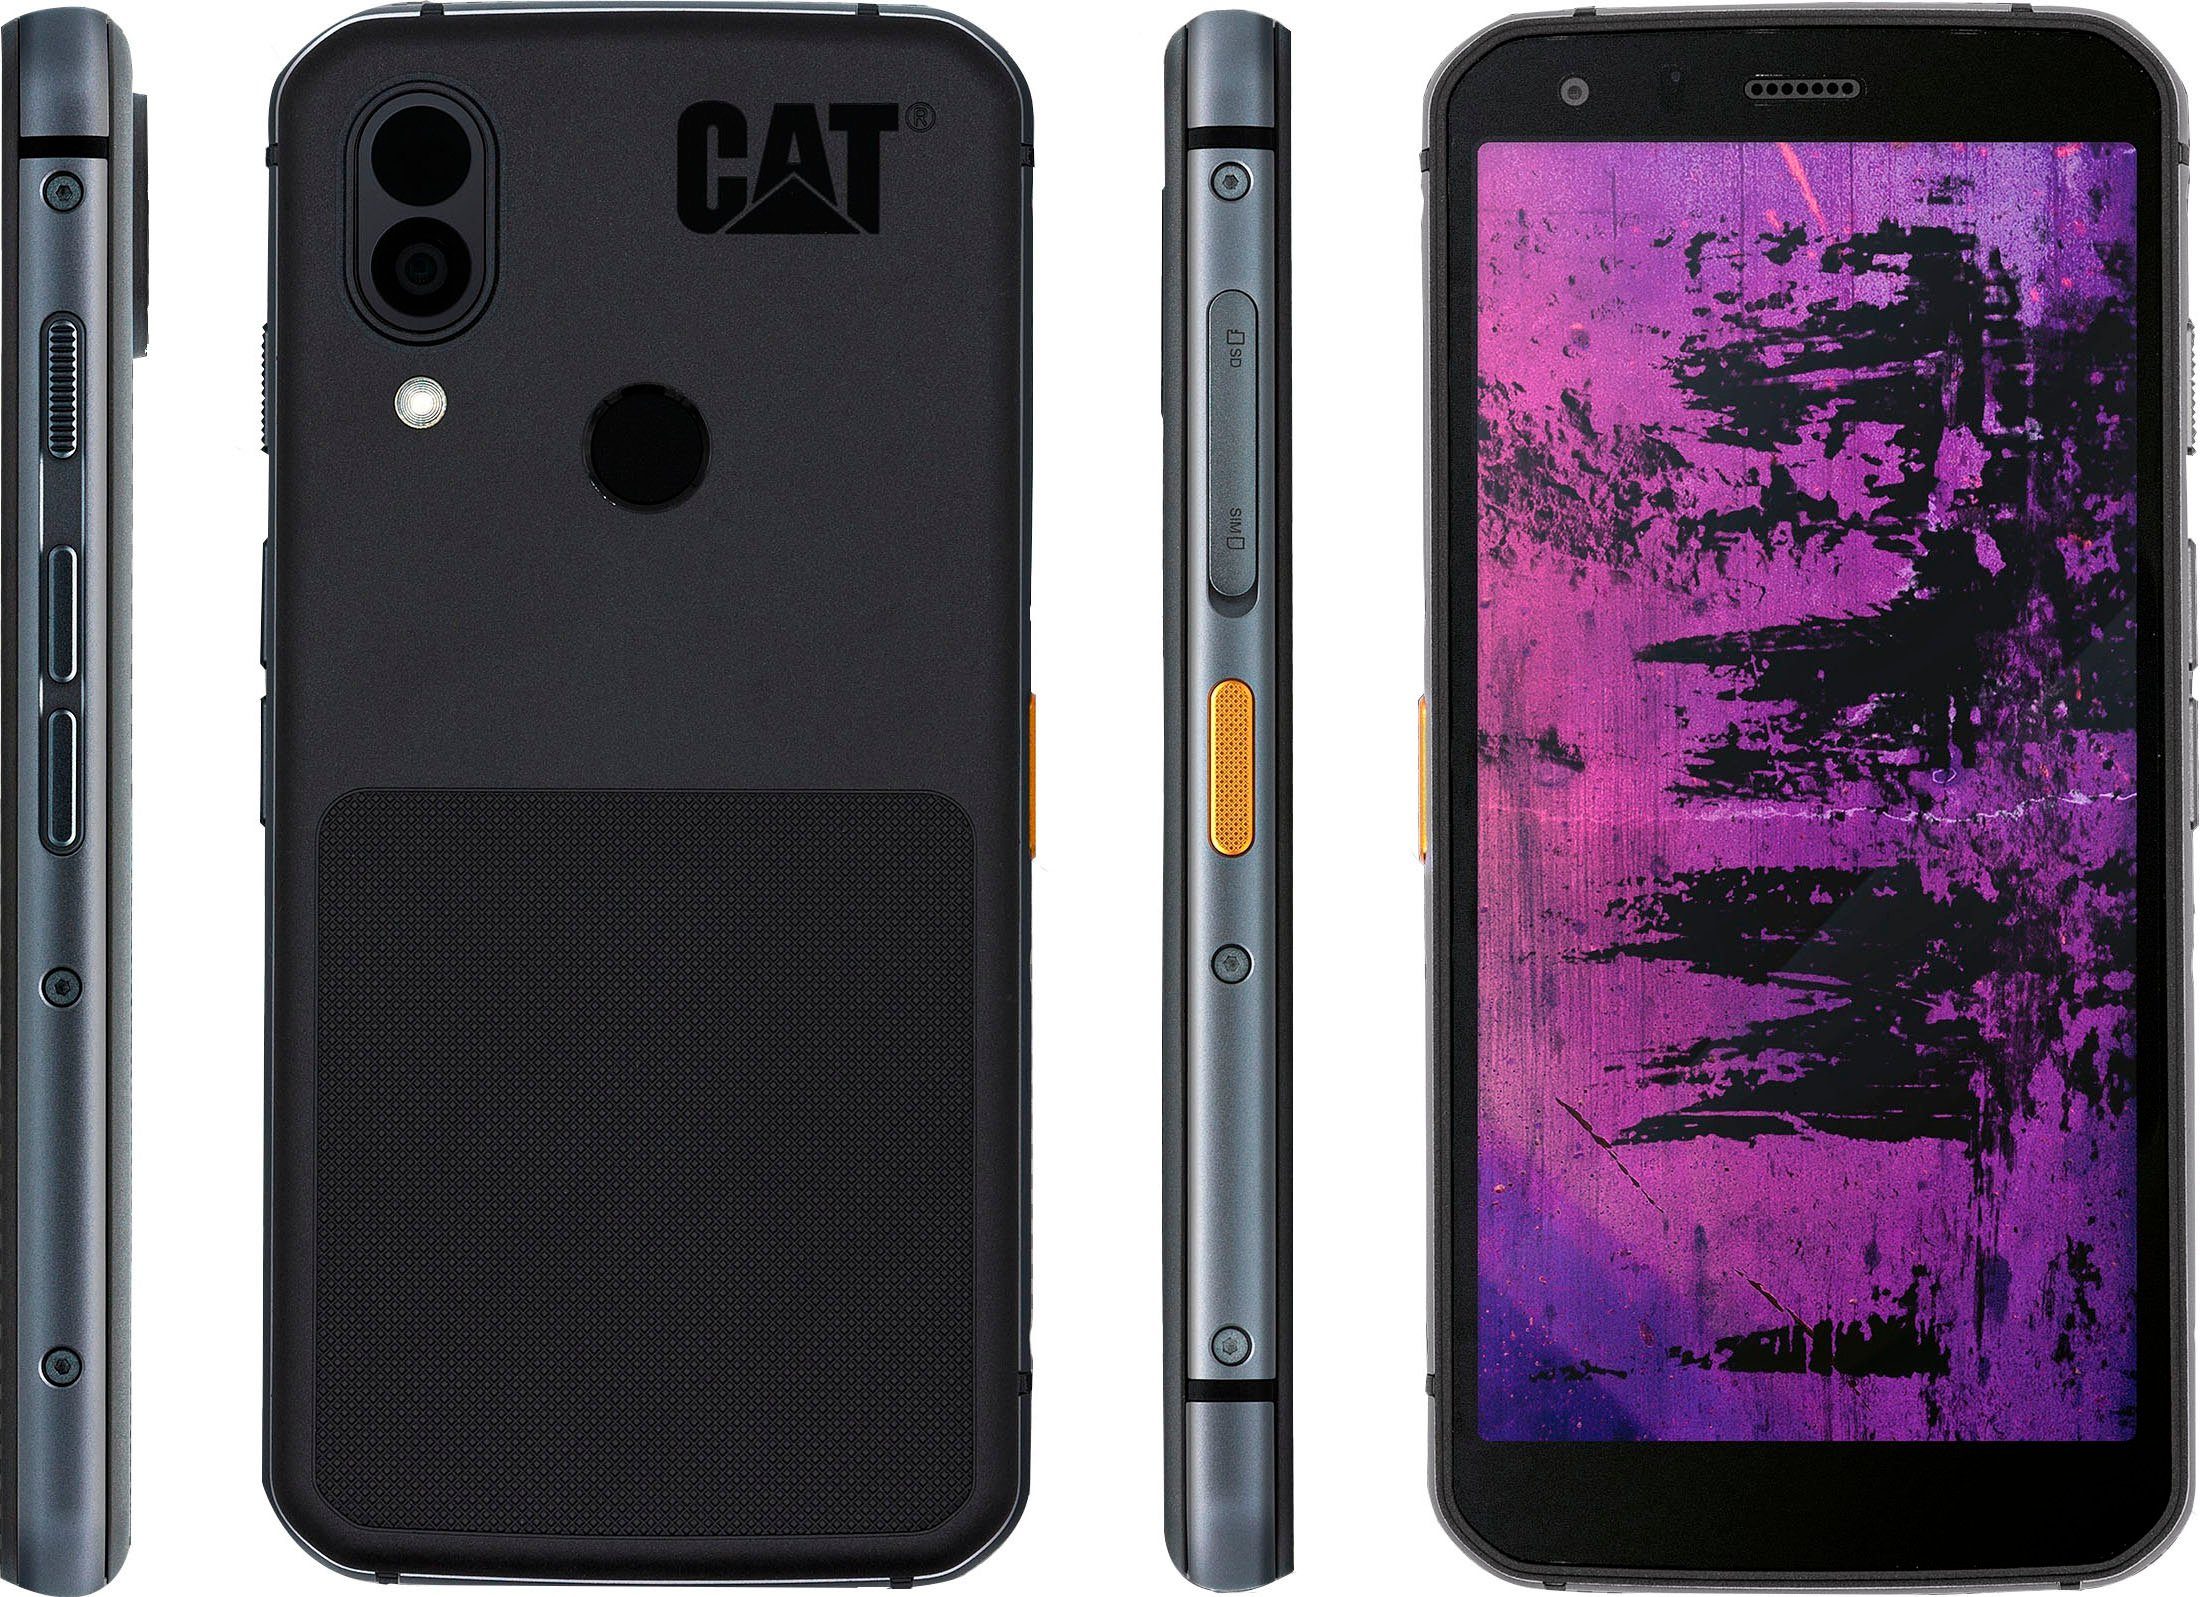 Best rugged smartphones for construction in 2021 - Cat S62 Pro